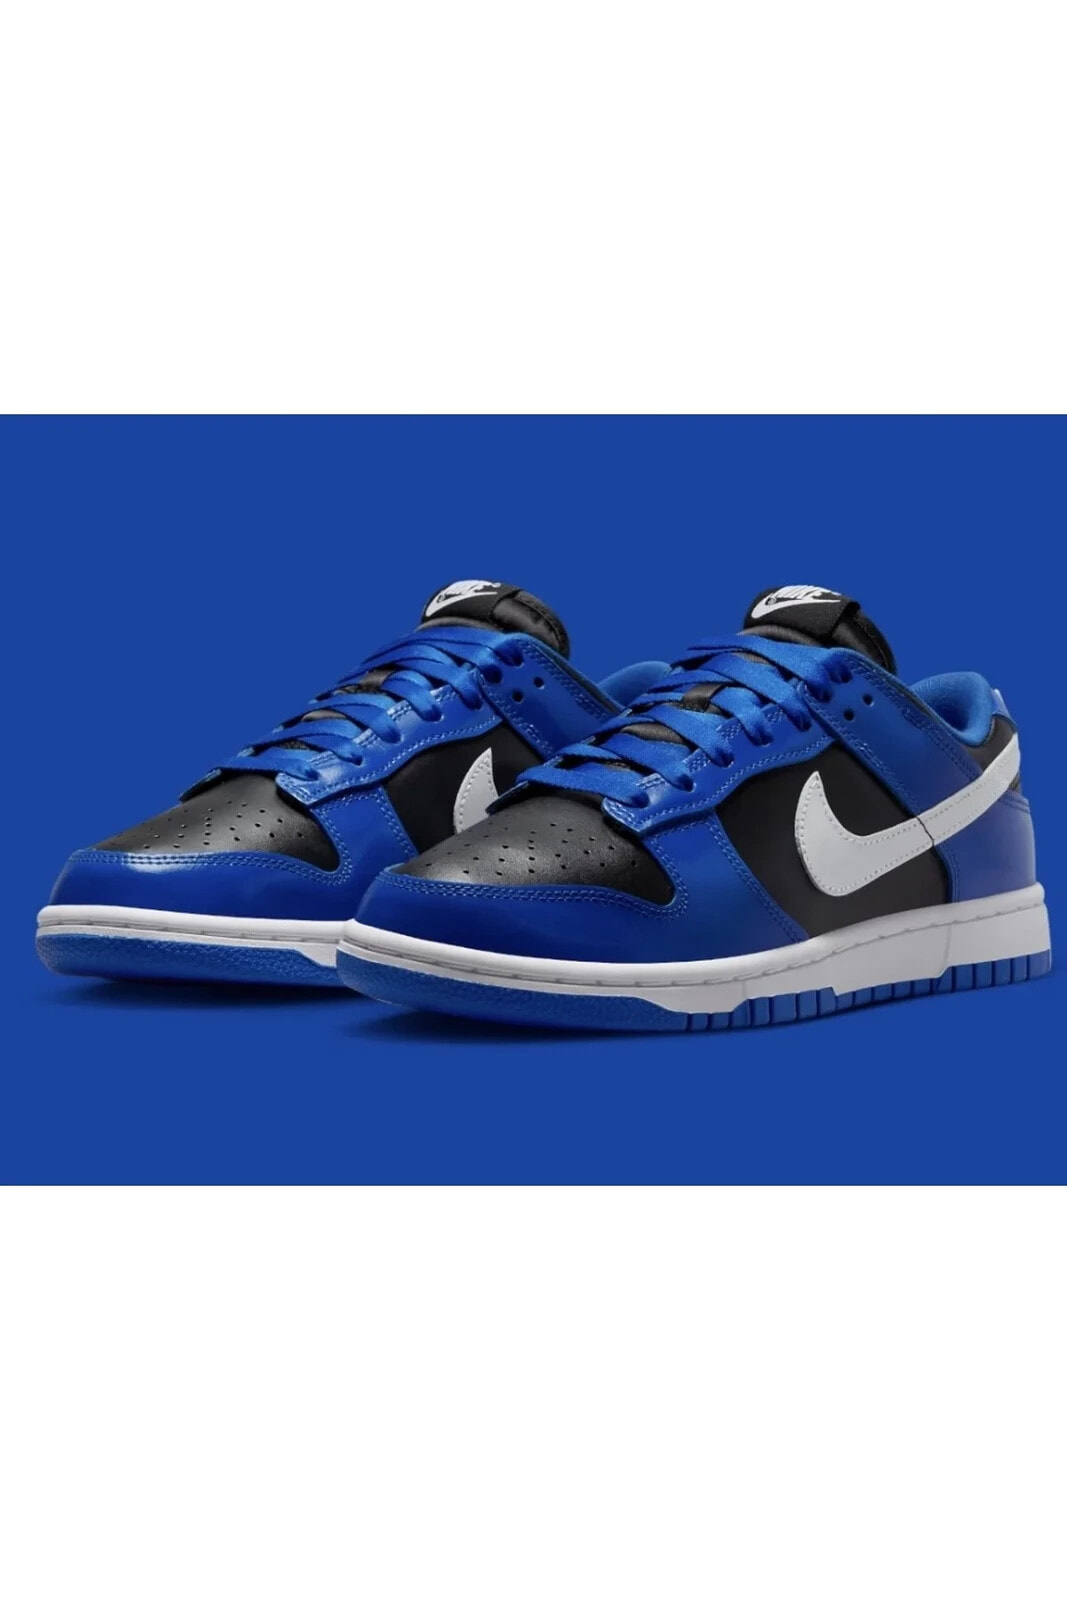 Dunk Low Essential Game Royal Black White -DQ7576-400